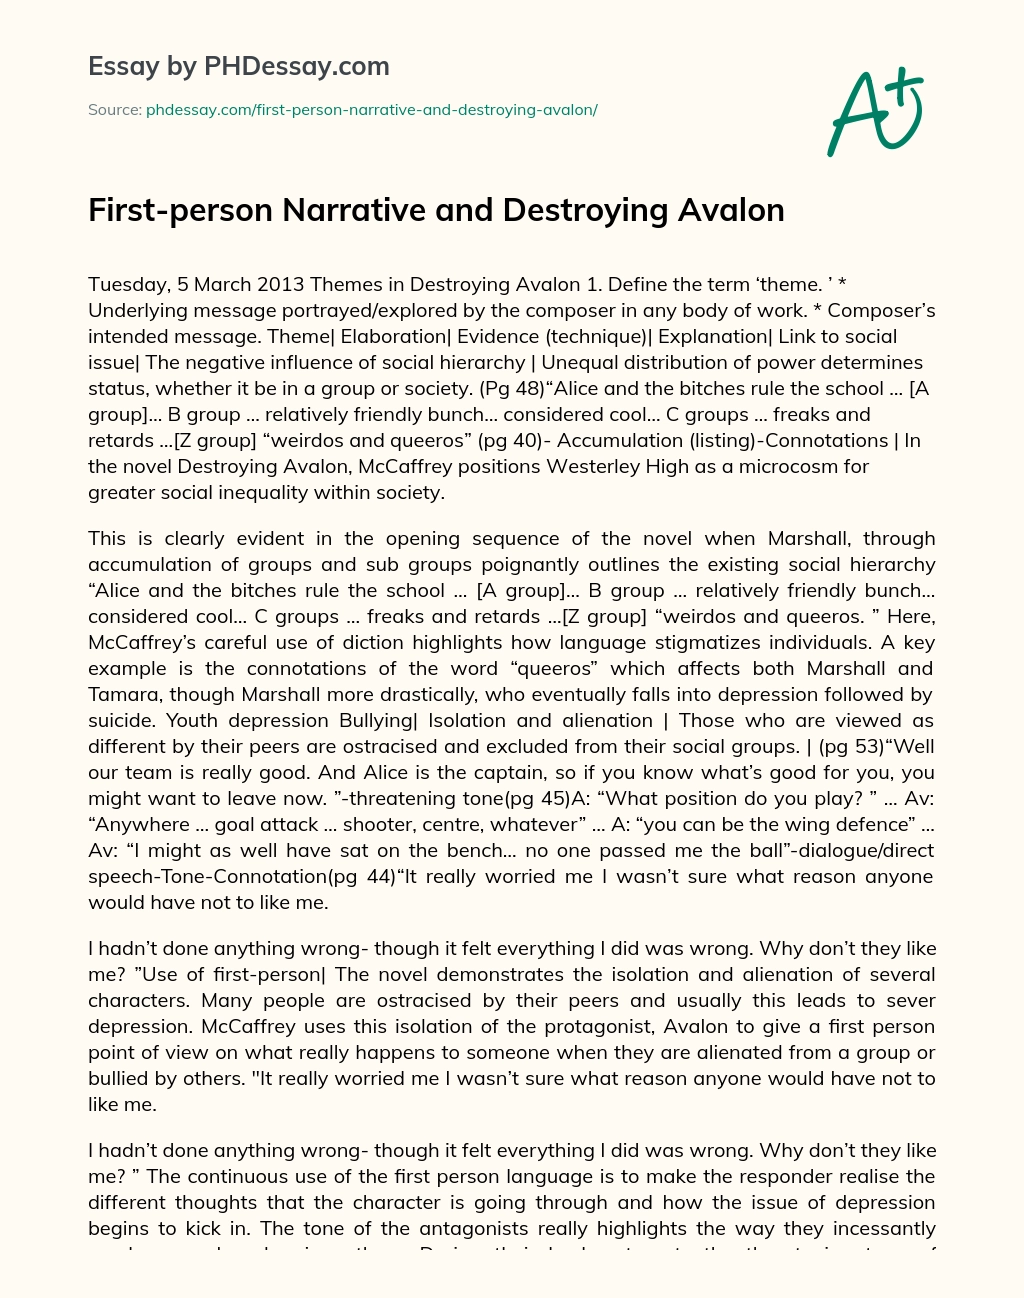 First-person Narrative and Destroying Avalon essay